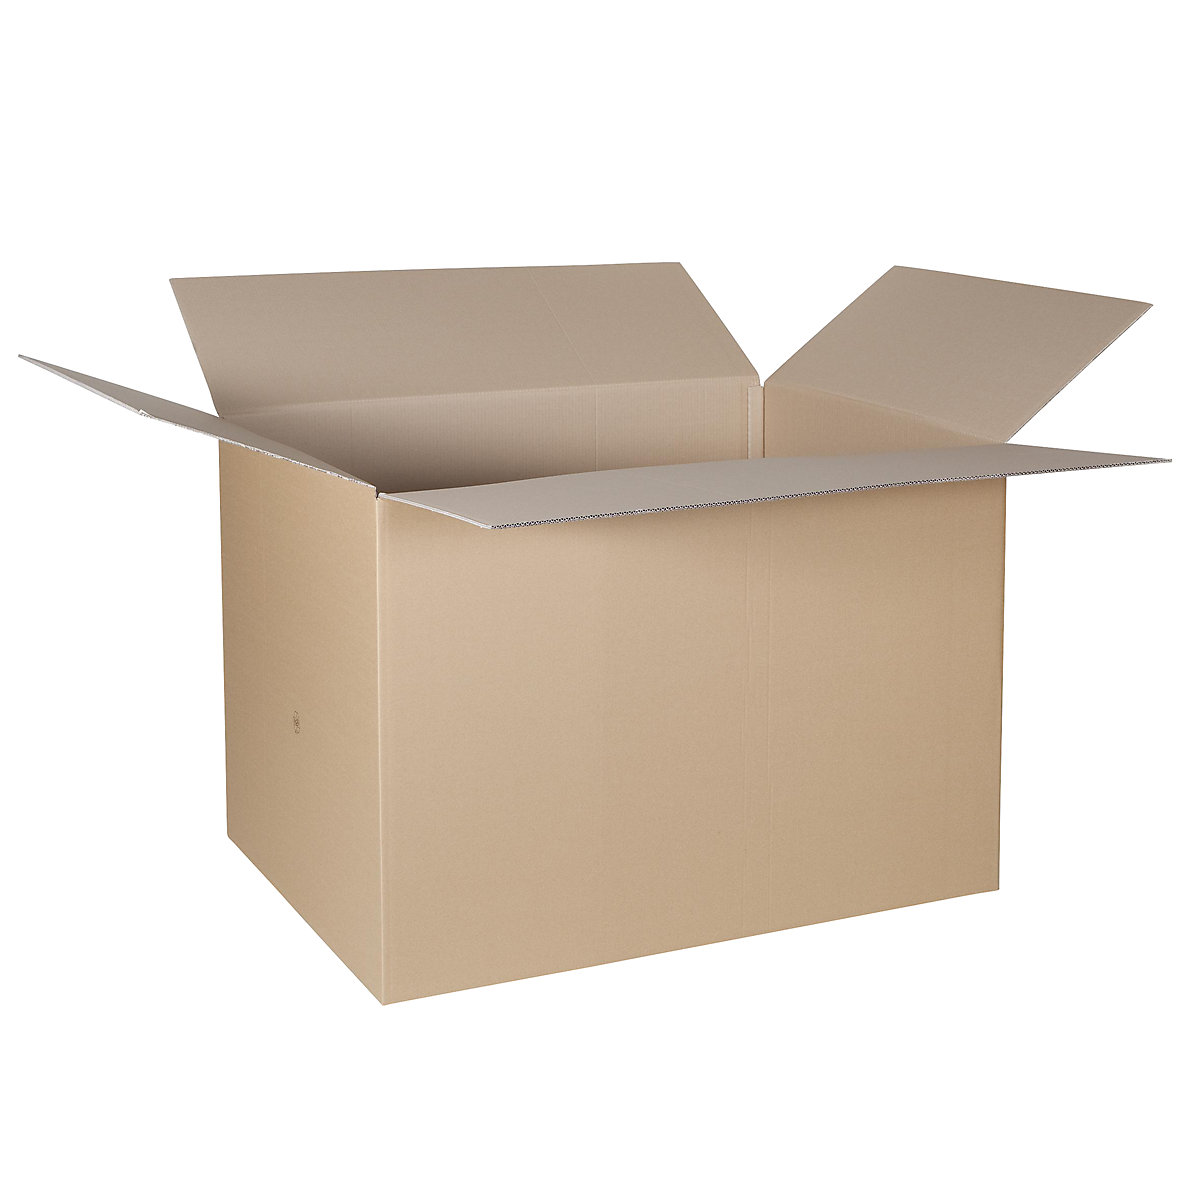 Folding cardboard box, FEFCO 0201, made of double fluted cardboard, internal dimensions 1180 x 780 x 800 mm, pack of 50-377